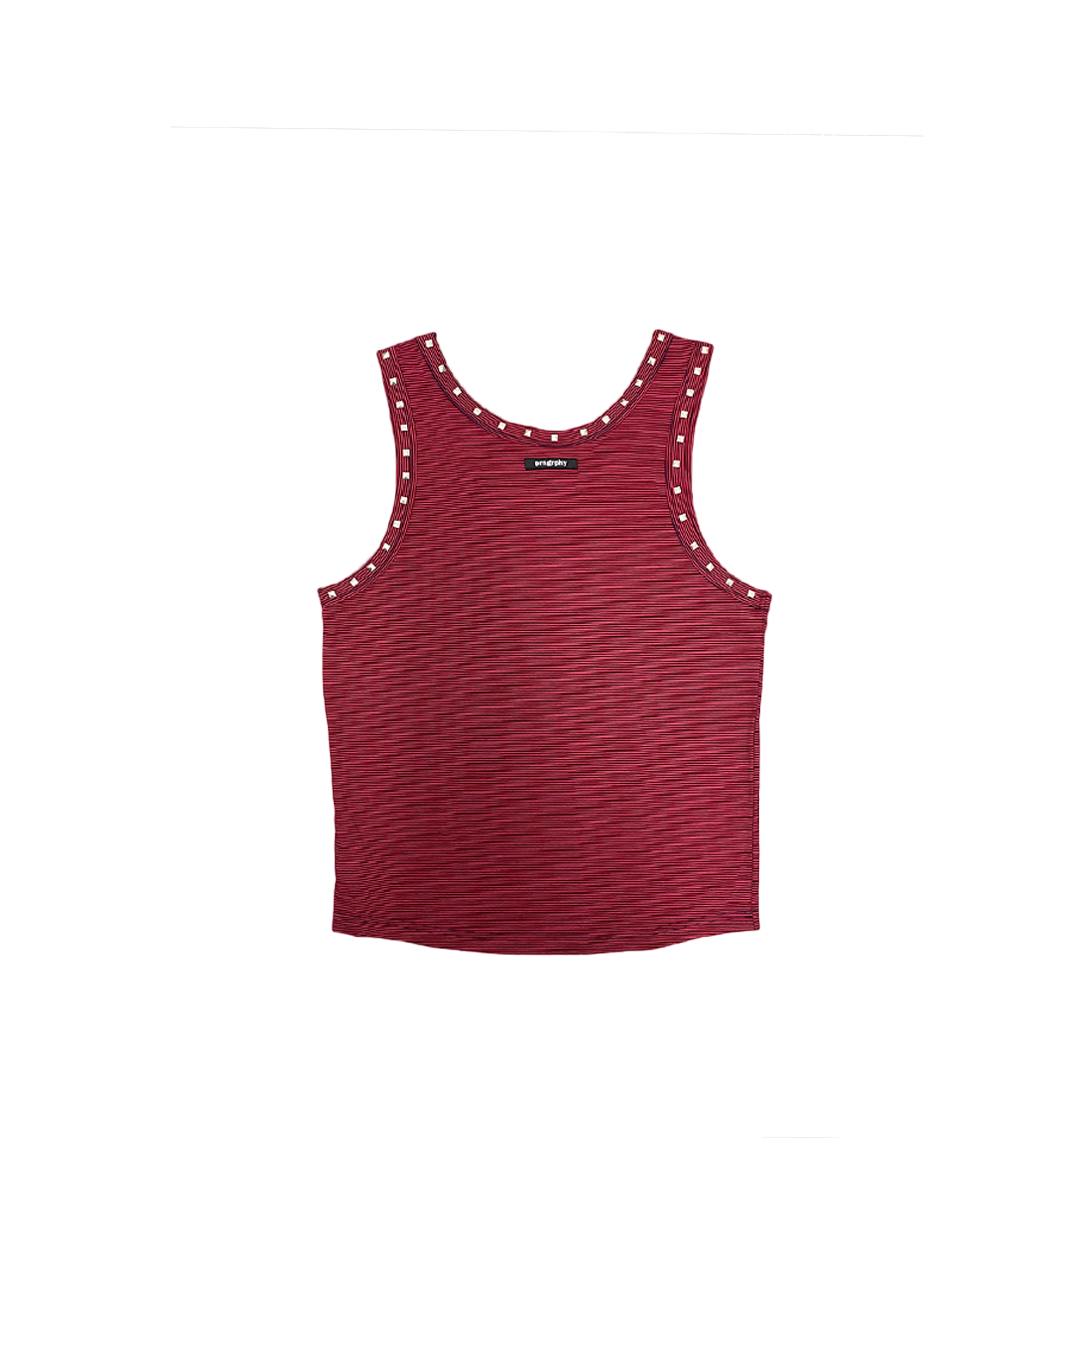 prngrphy - Red Striped Studded Tank Top.